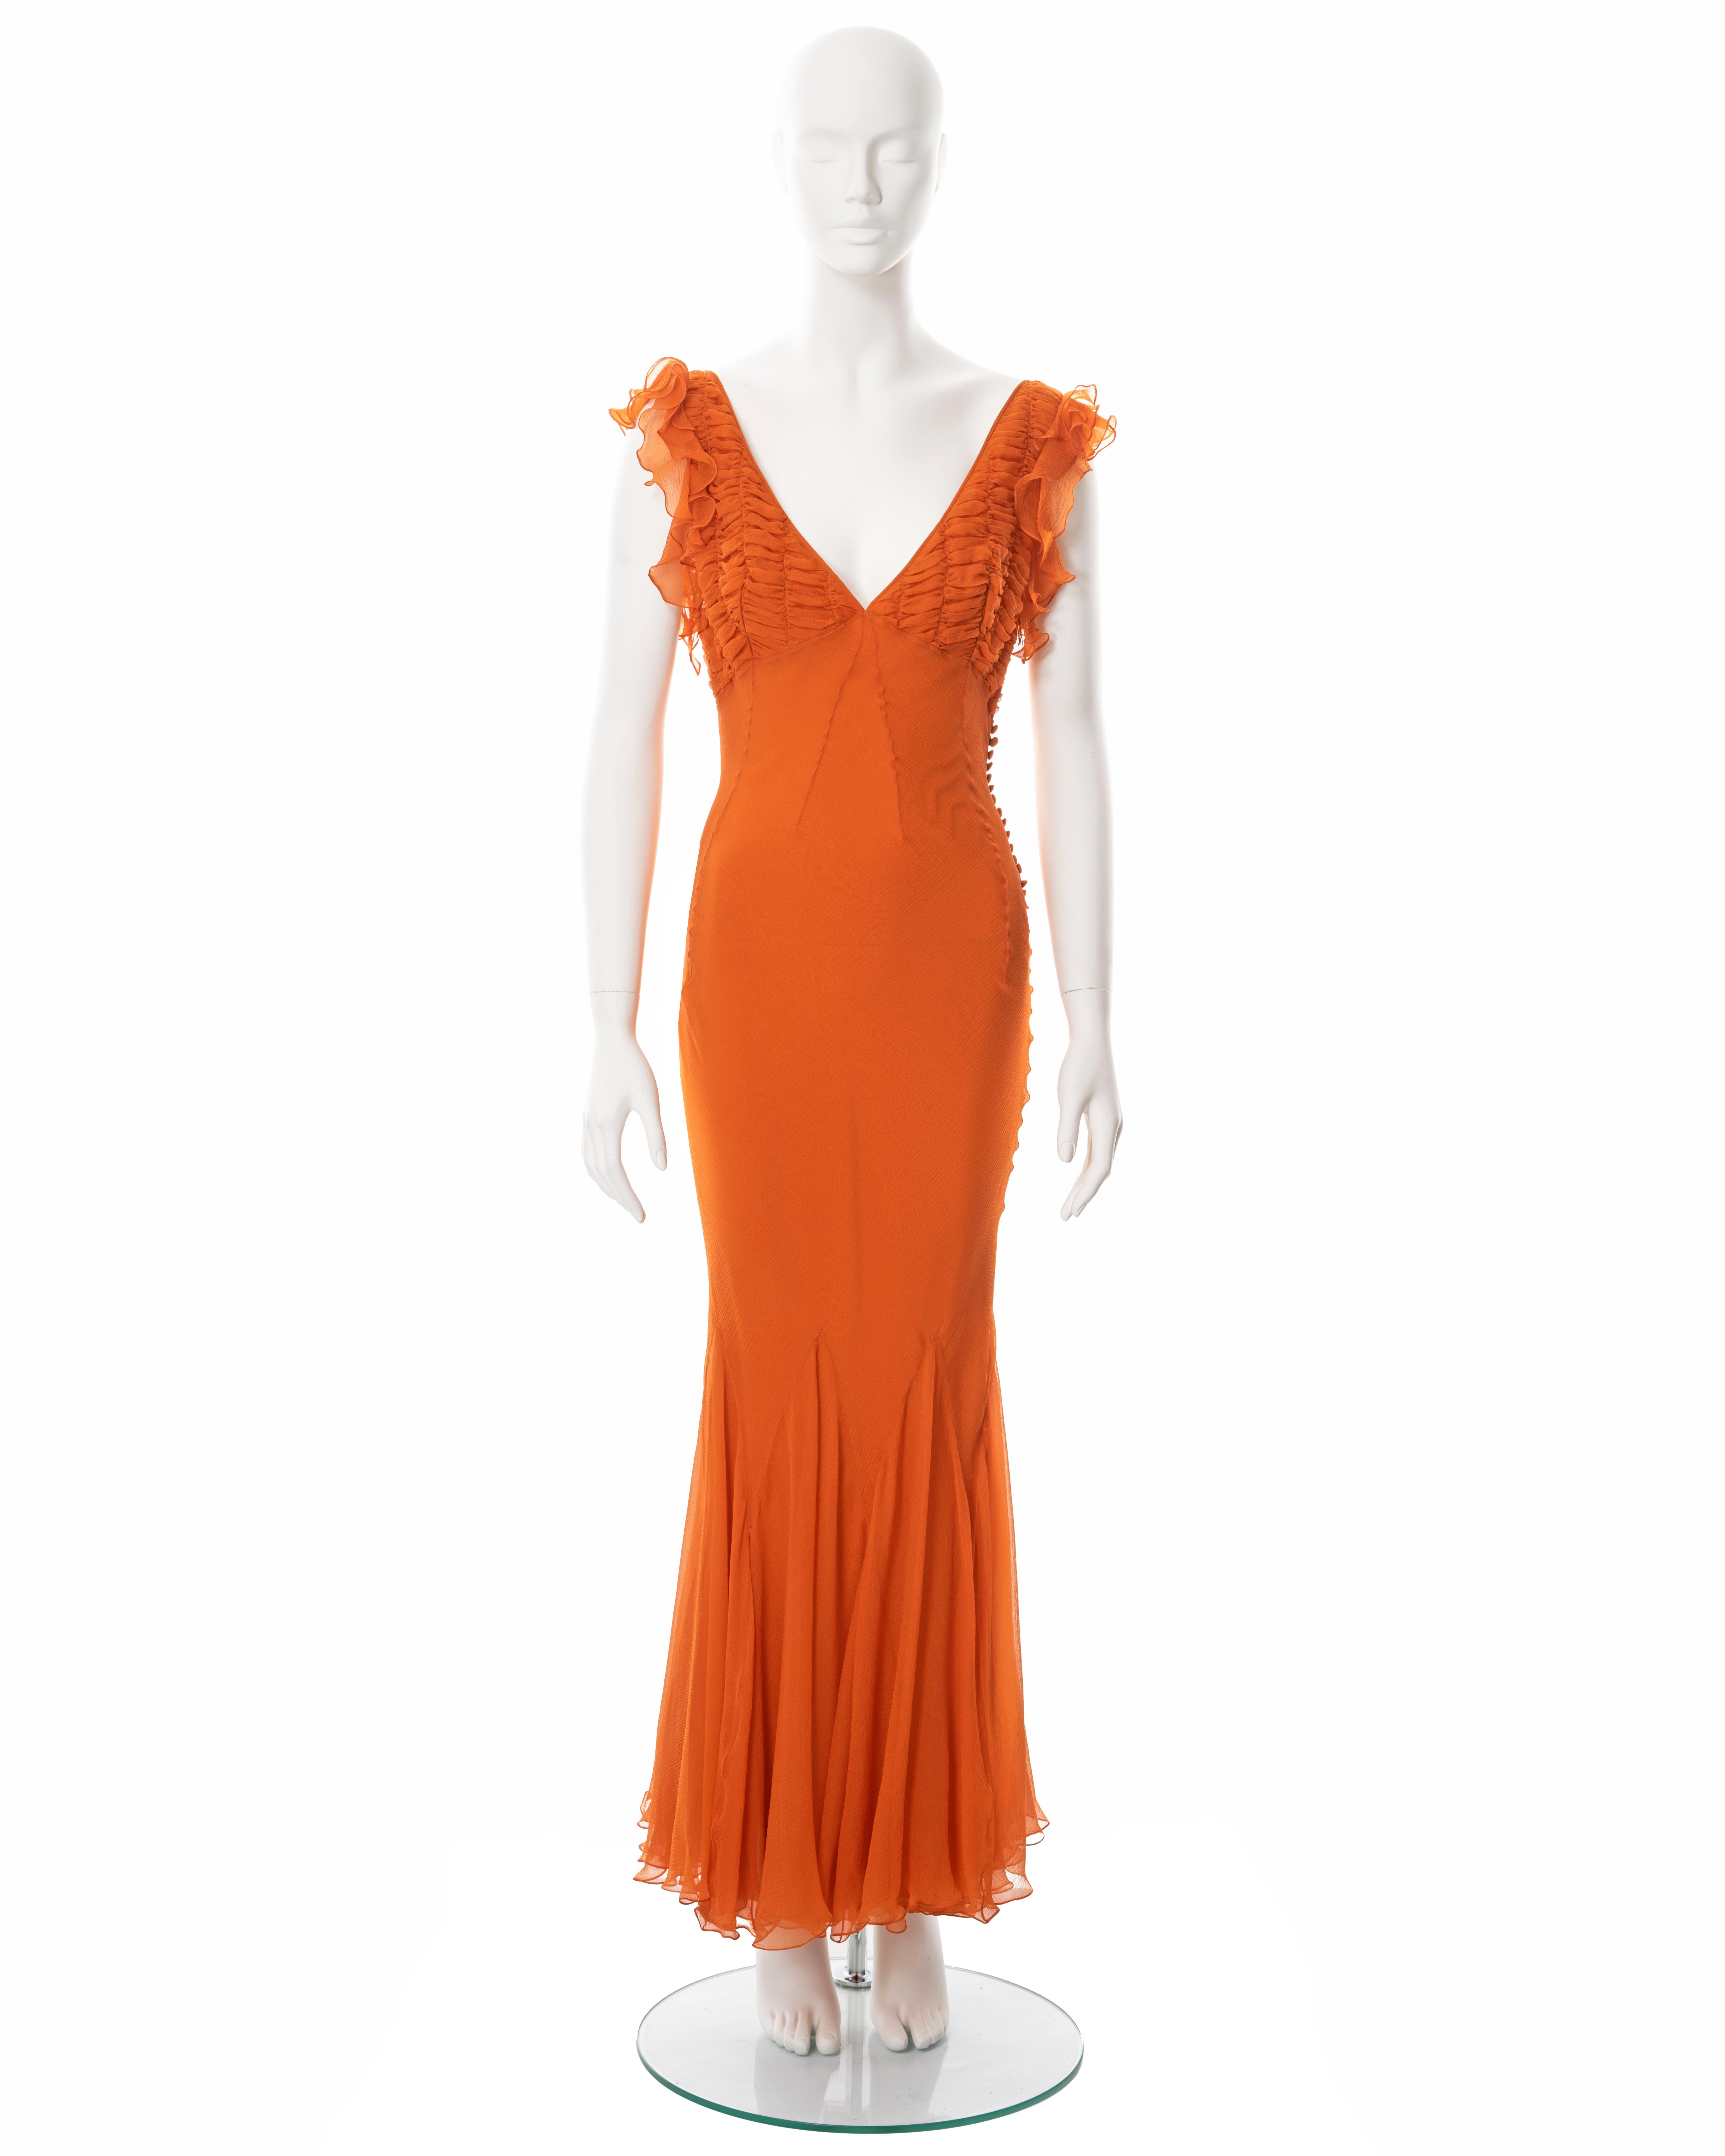 ▪ Christian Dior orange silk evening dress
▪ Designed by John Galliano
▪ Sold by One of a Kind Archive
▪ Constructed from orange bias-cut crinkled silk chiffon 
▪ Smocked chiffon on the bust with ruffled frill trim 
▪ V-neck 
▪ Multiple fabric